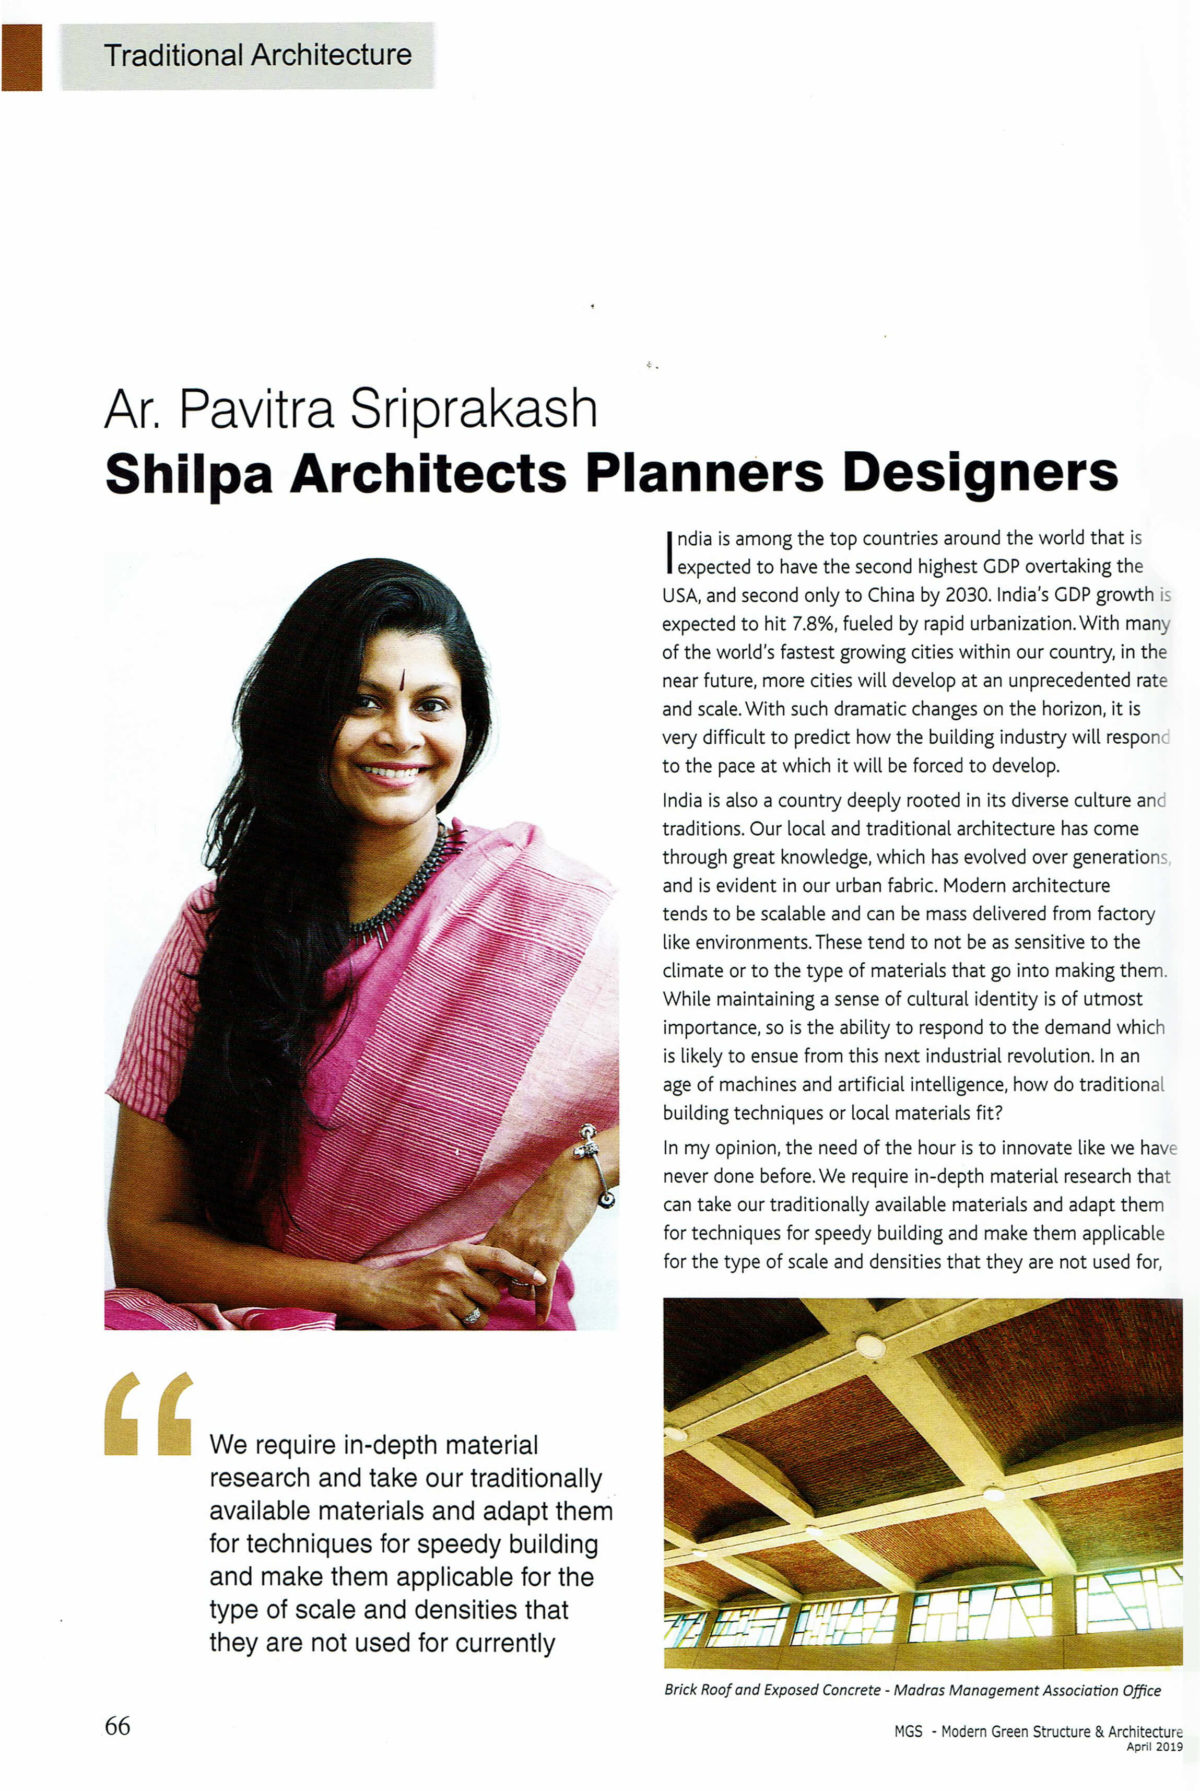 Pavitra Sriprakash, the Chief Designer and Director of Shilpa Architects Planners Designers is featured in the MGS Architecture magazine 2019.